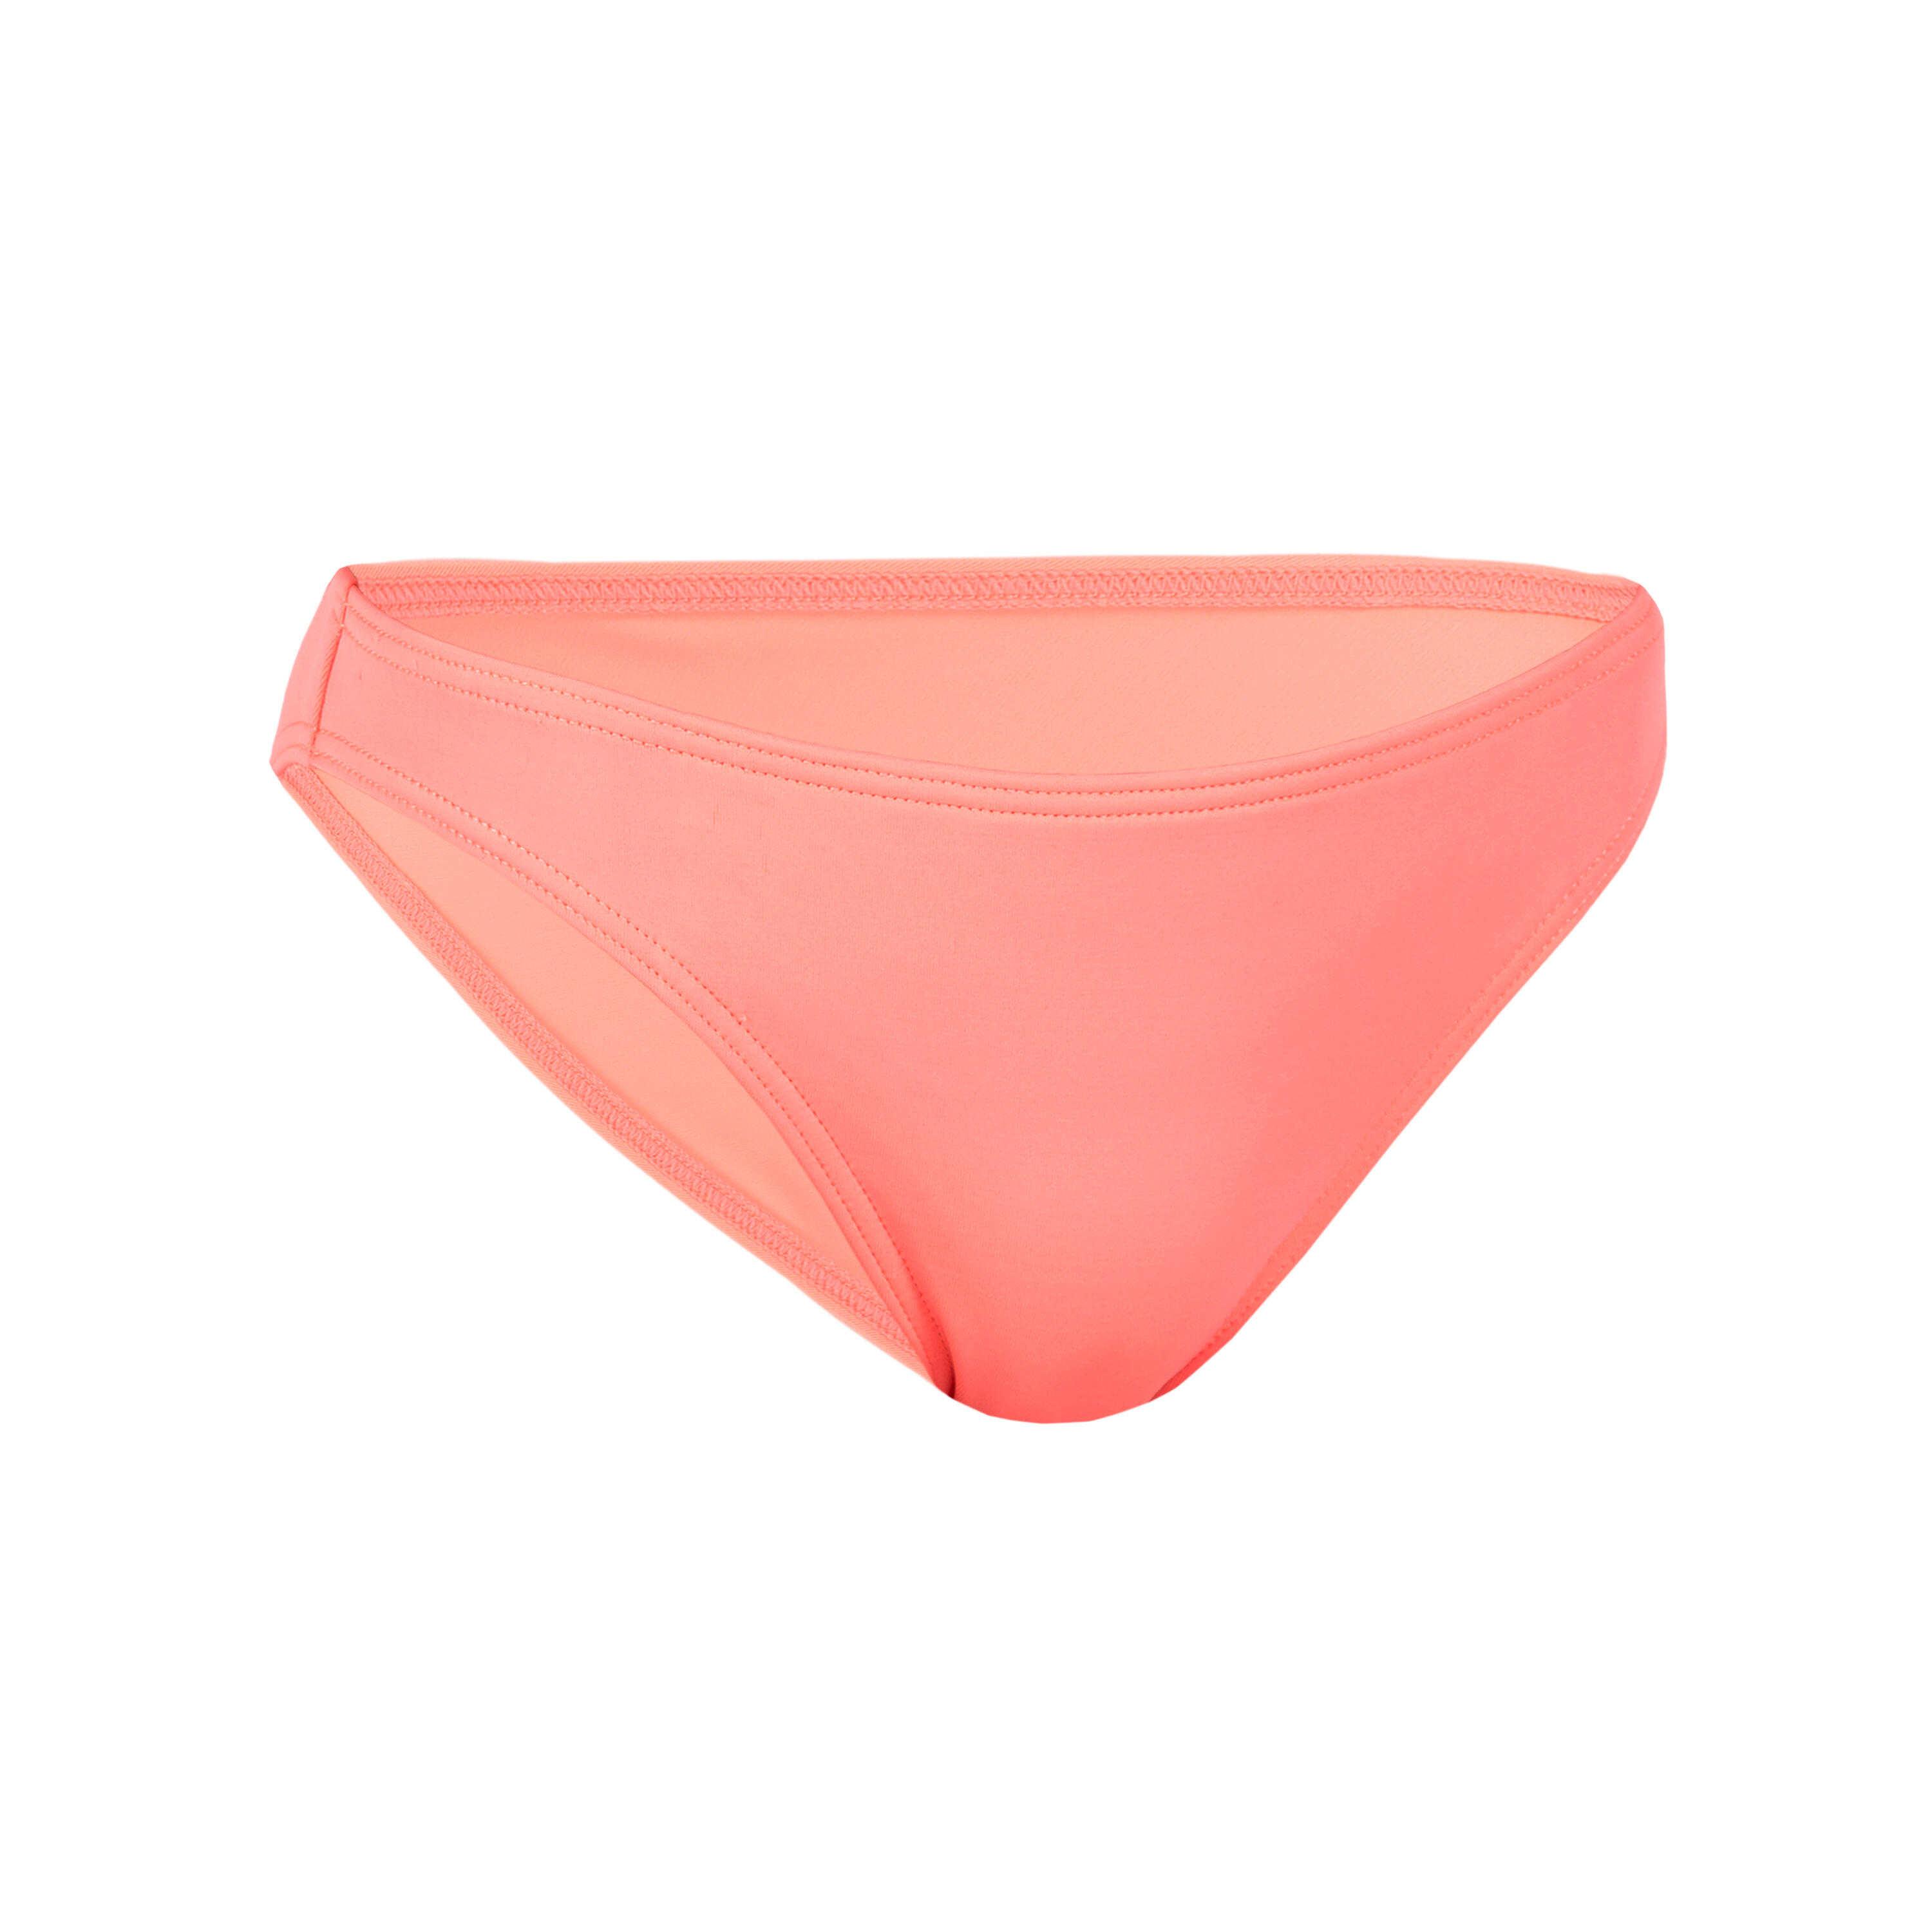 Image of Kids' Swimsuit Bottoms - 100